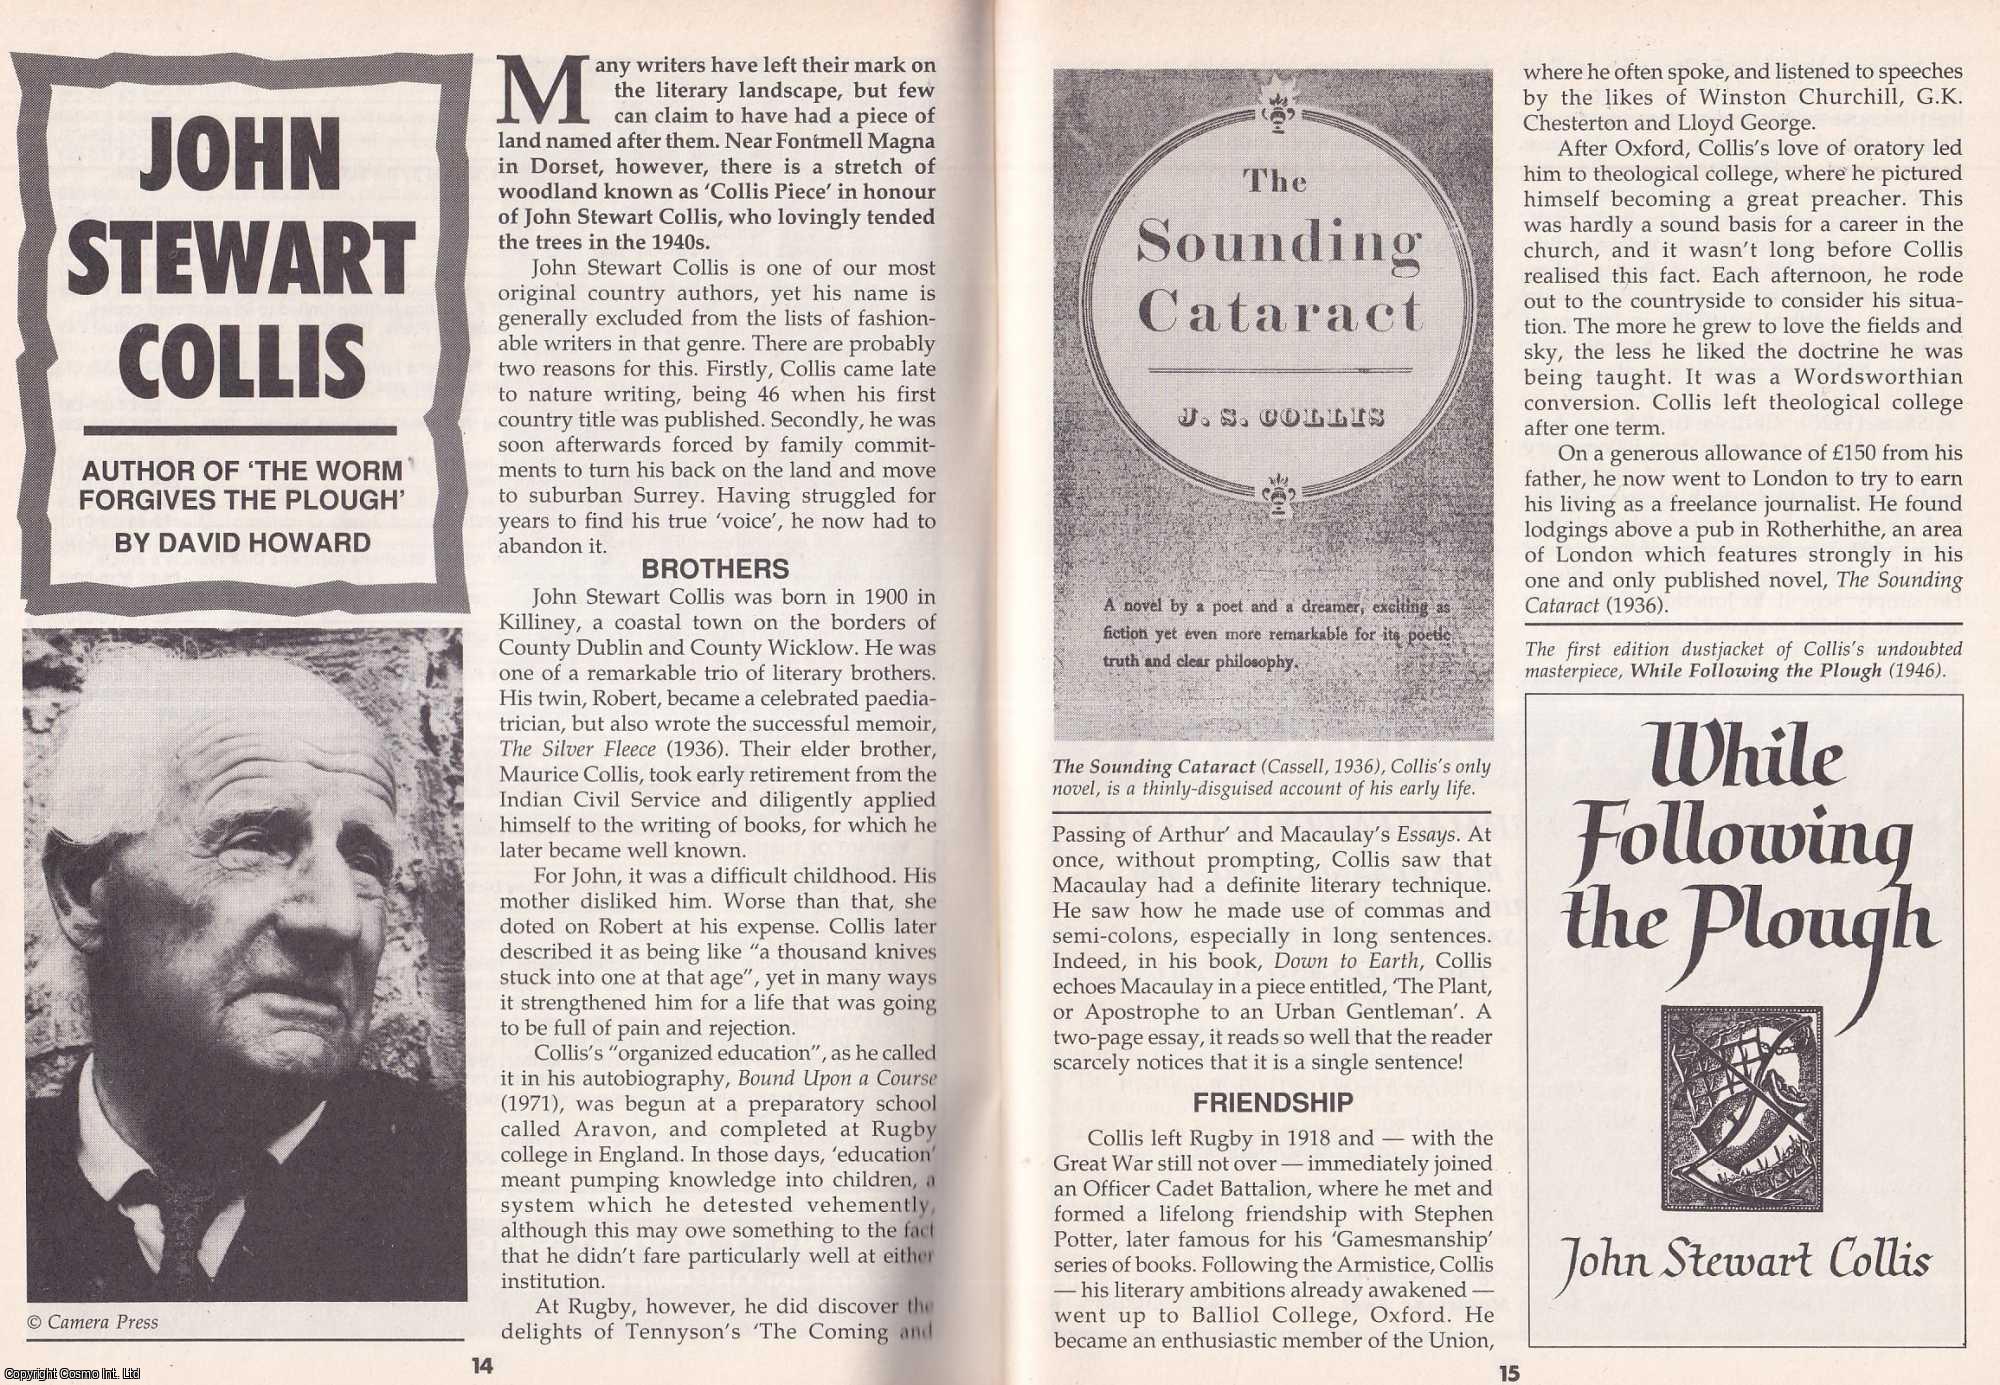 David Howard - John Stewart Collis. Author of The Worm Forgives The Plough. This is an original article separated from an issue of The Book & Magazine Collector publication, 1994.